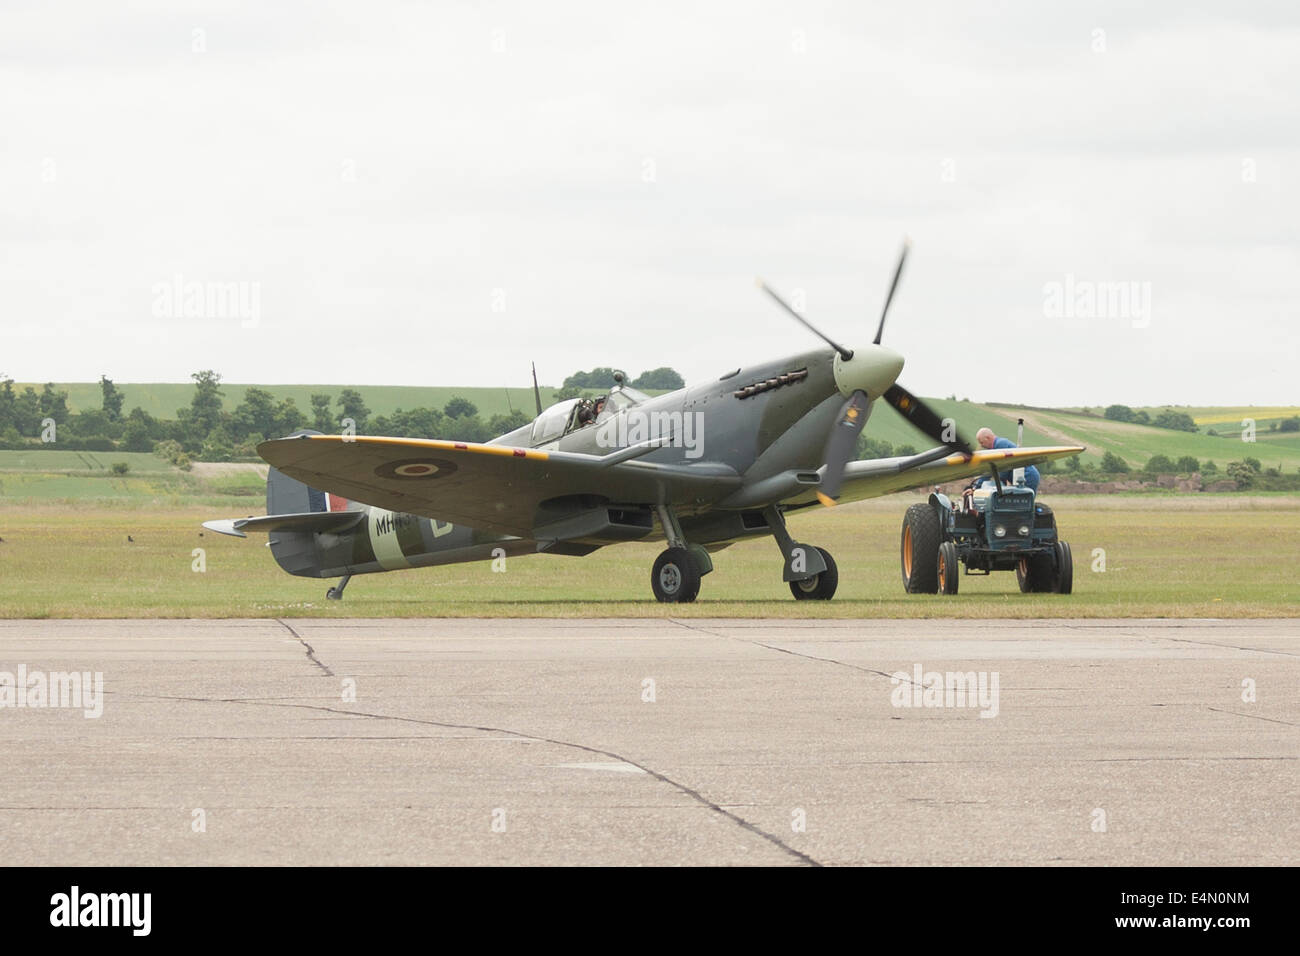 Supermarine Spitfire on the edge of the runway with tractor at Imperial War Museum Duxford, United Kingdom Stock Photo